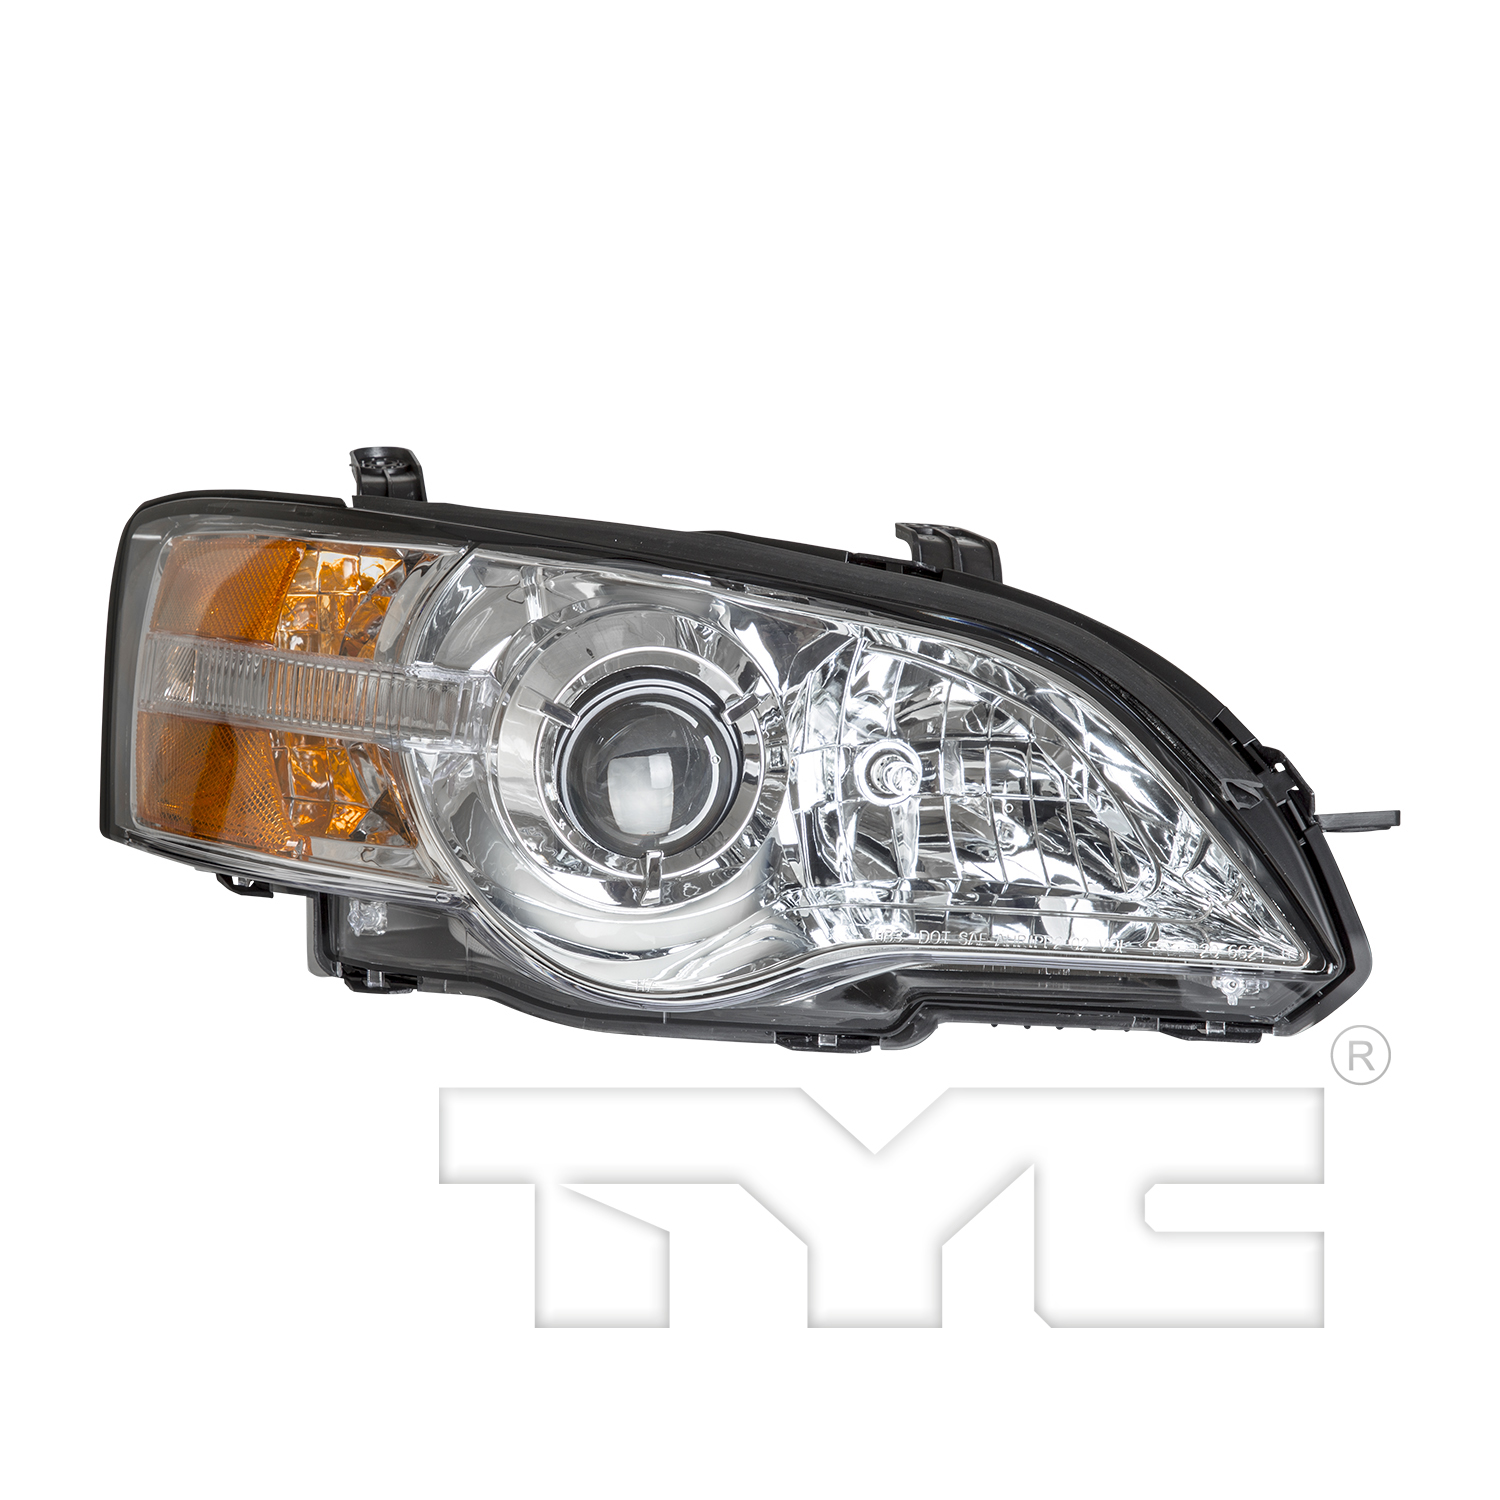 Aftermarket HEADLIGHTS for SUBARU - LEGACY, LEGACY,06-07,RT Headlamp assy composite